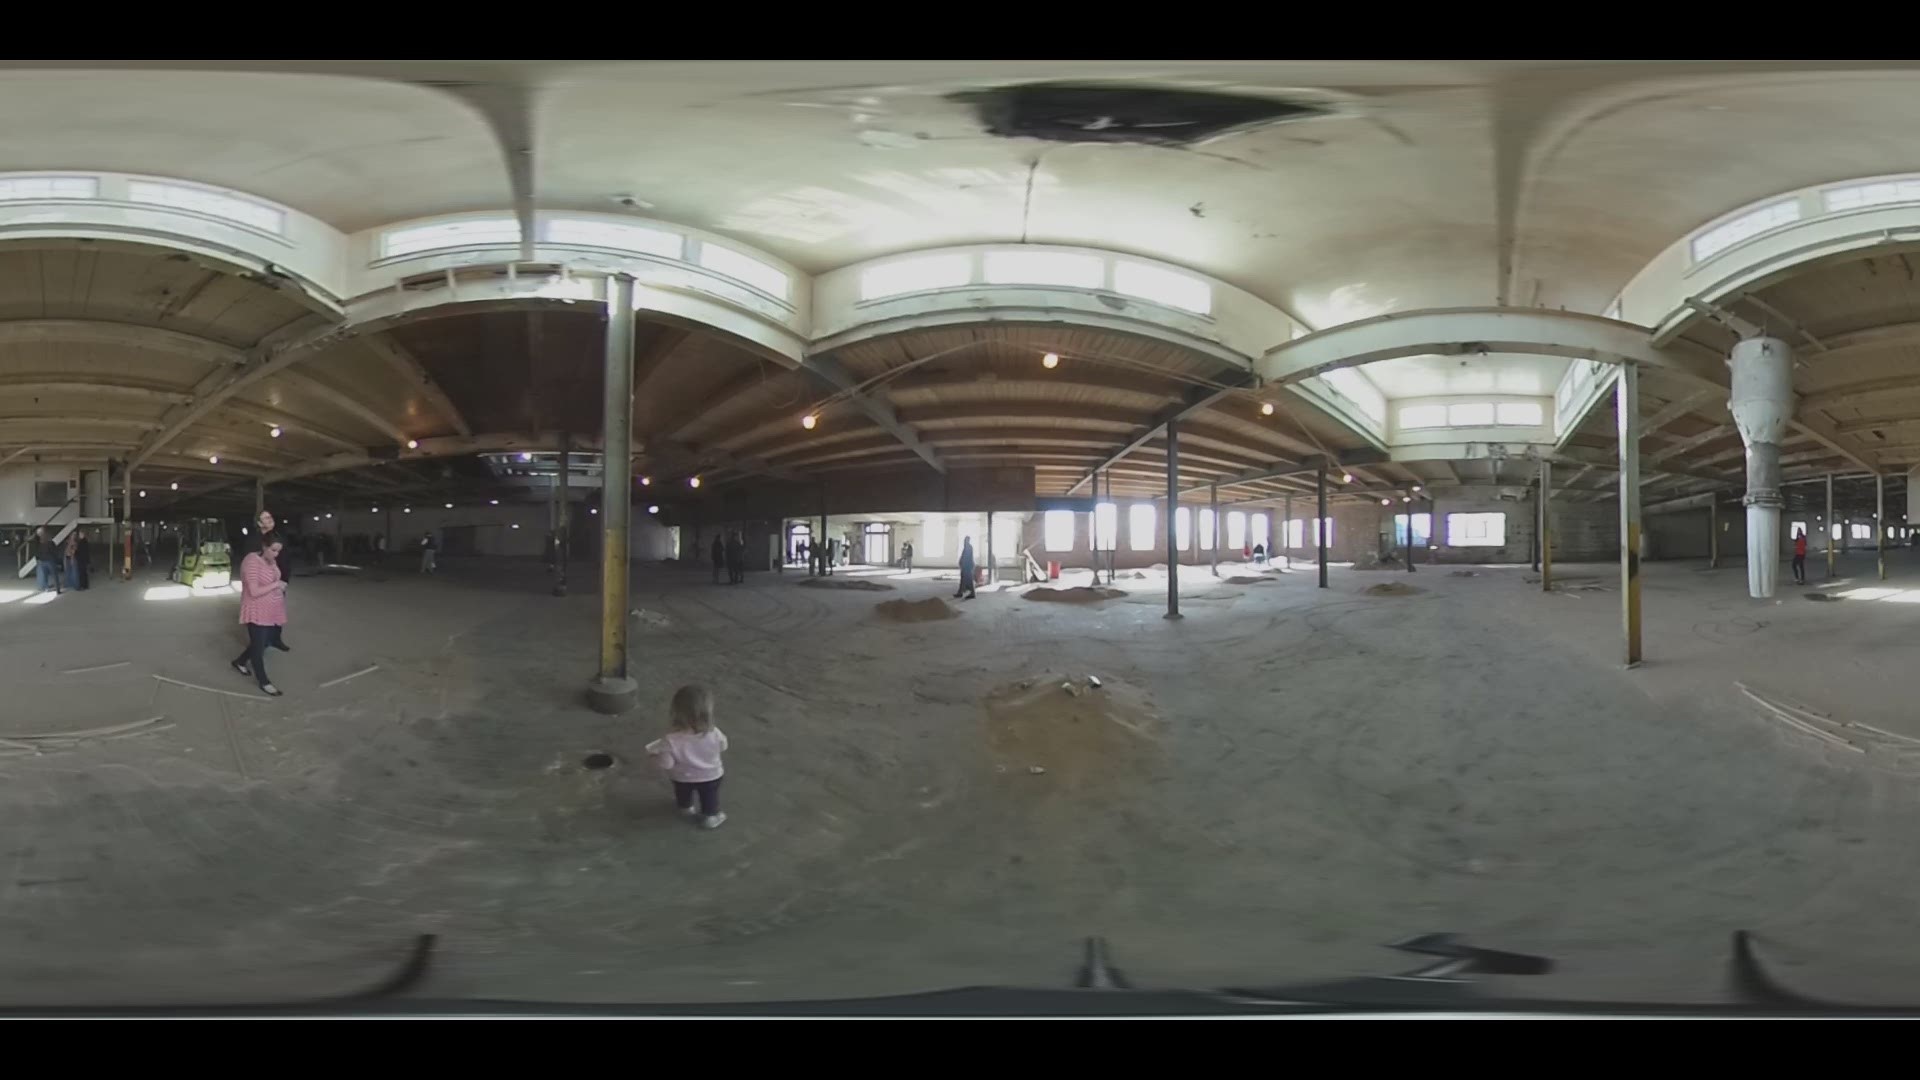 Take a look around the former Kern's Bakery building in this 360 degree video. Developers are fixing up the building for future tenants.